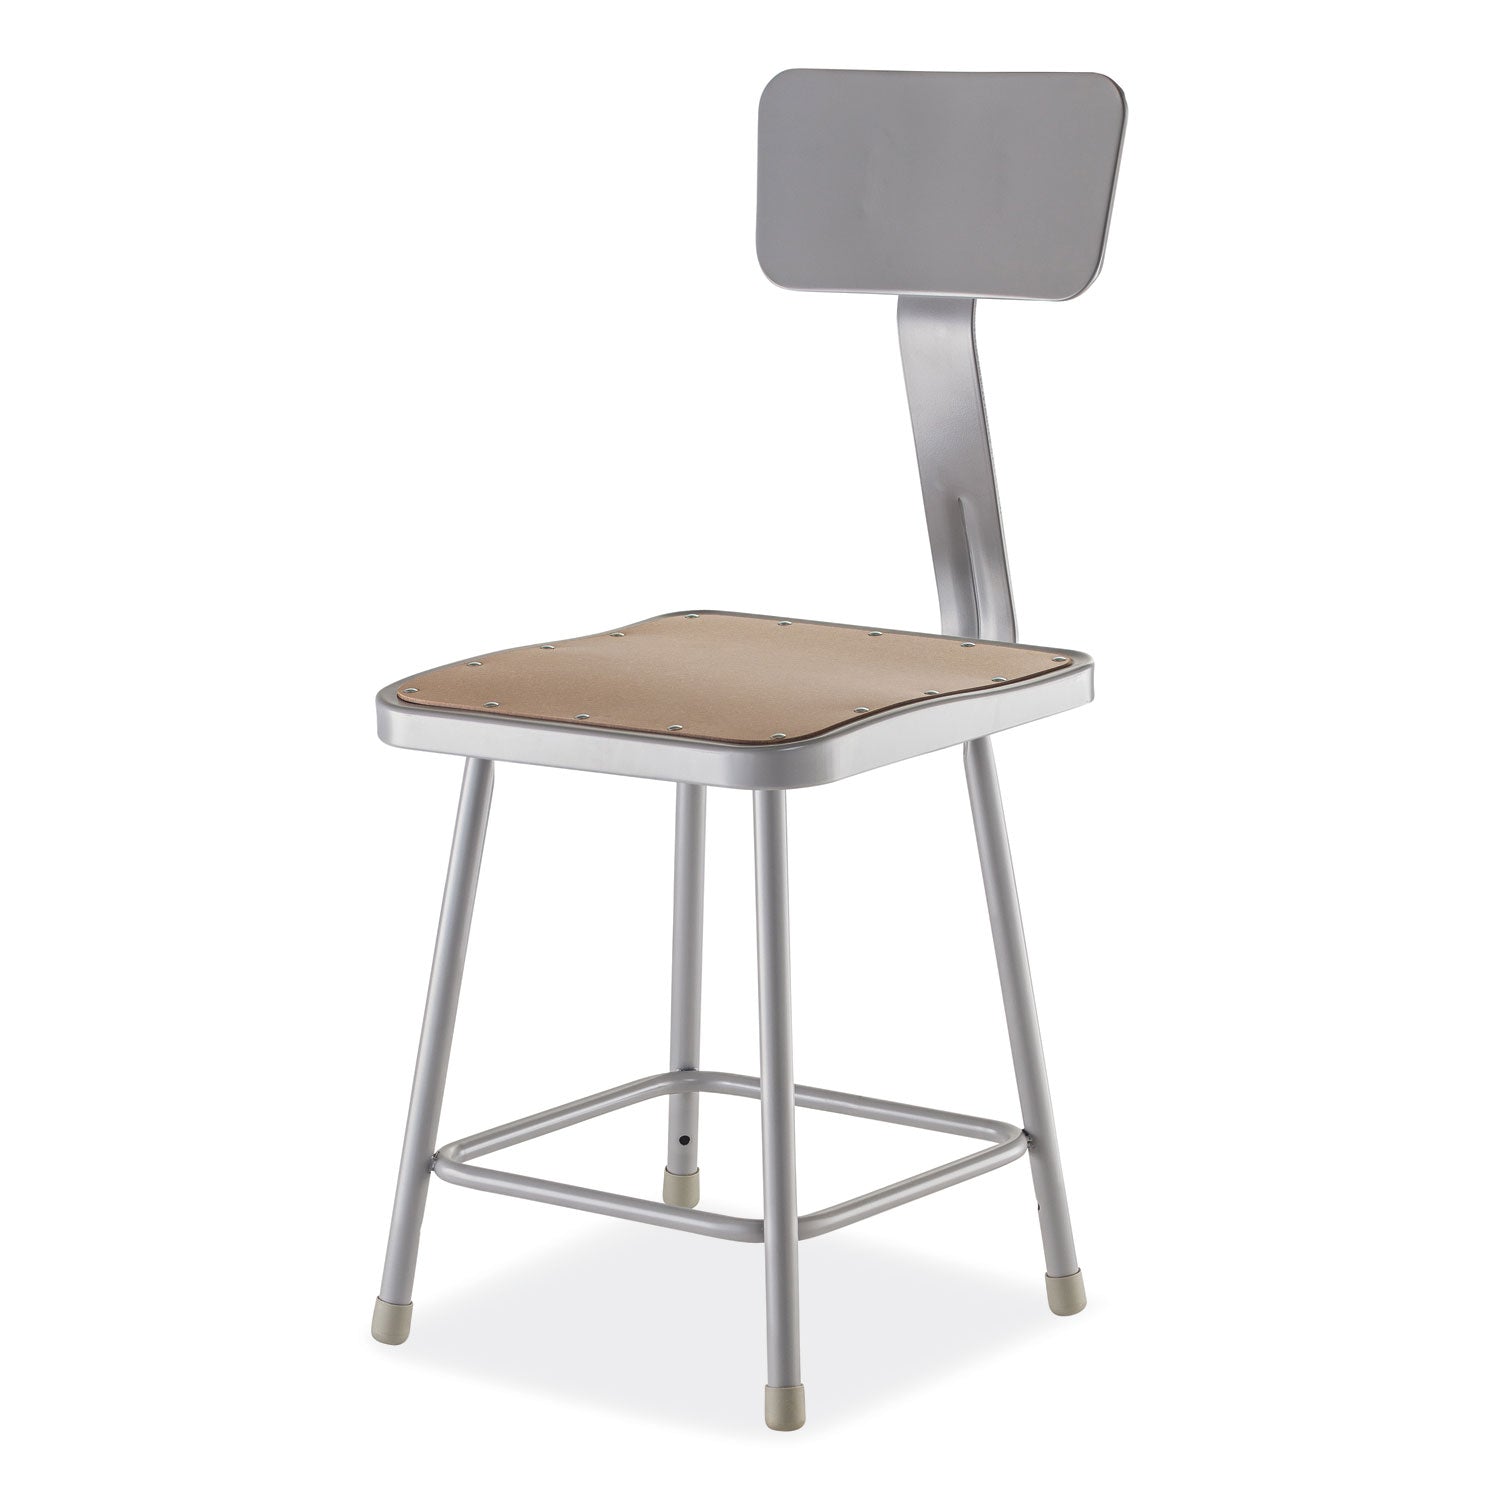 6300-series-hd-square-seat-stool-w-backrest-supports-500-lb-175-seat-ht-brown-seatgray-back-base-ships-in-1-3-bus-days_nps6318b - 1